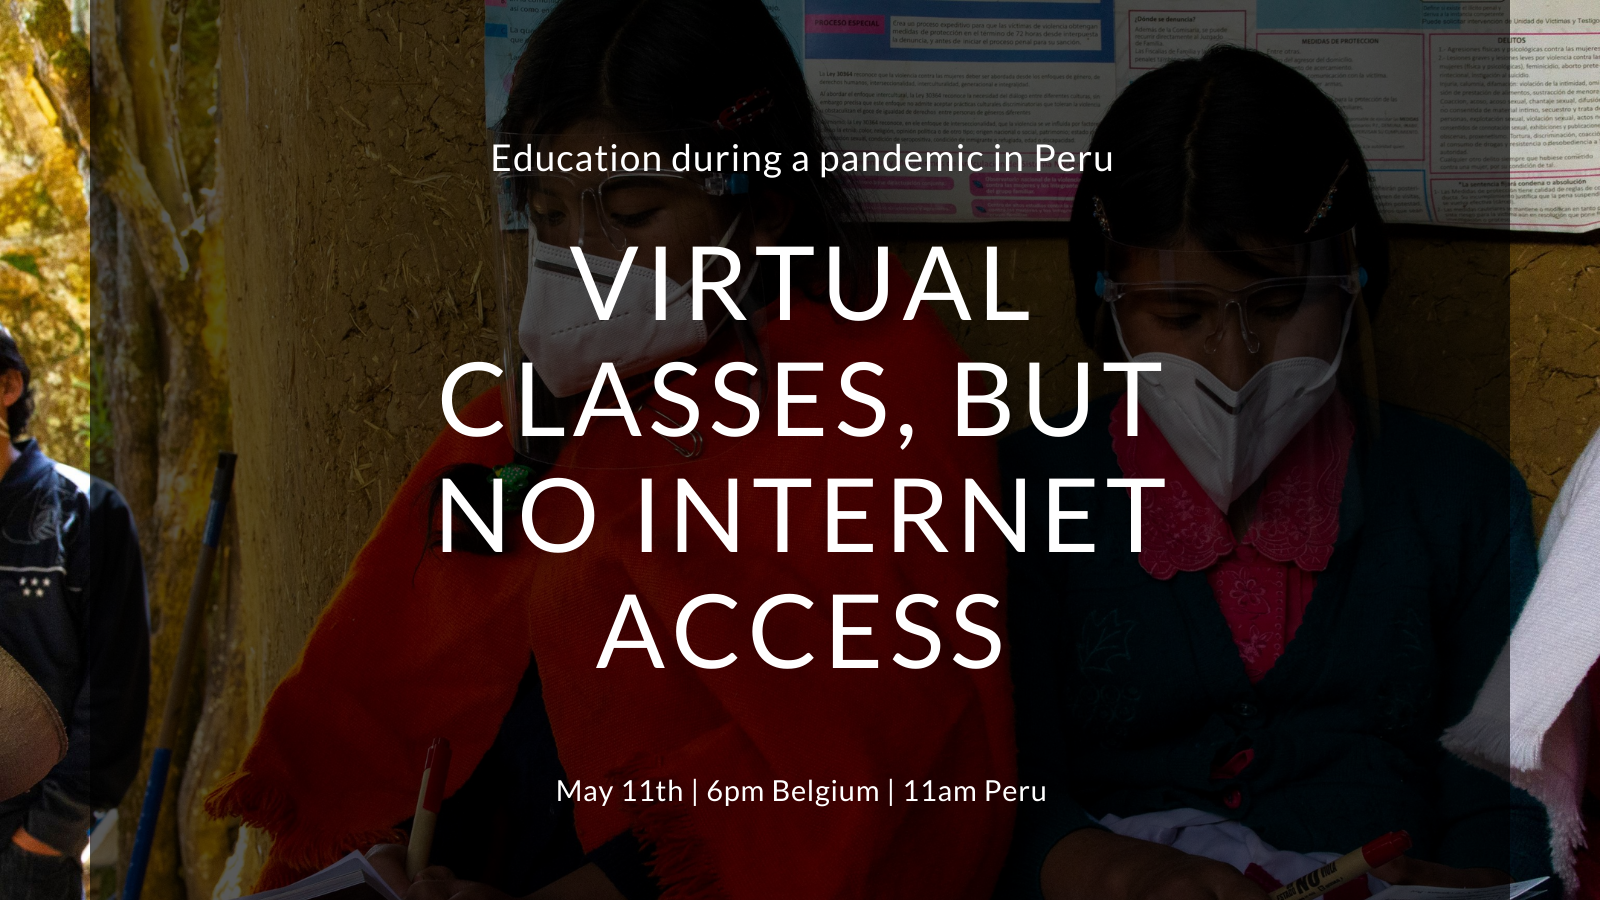 Virtual classes, but no Internet access: Education during a pandemic in Peru